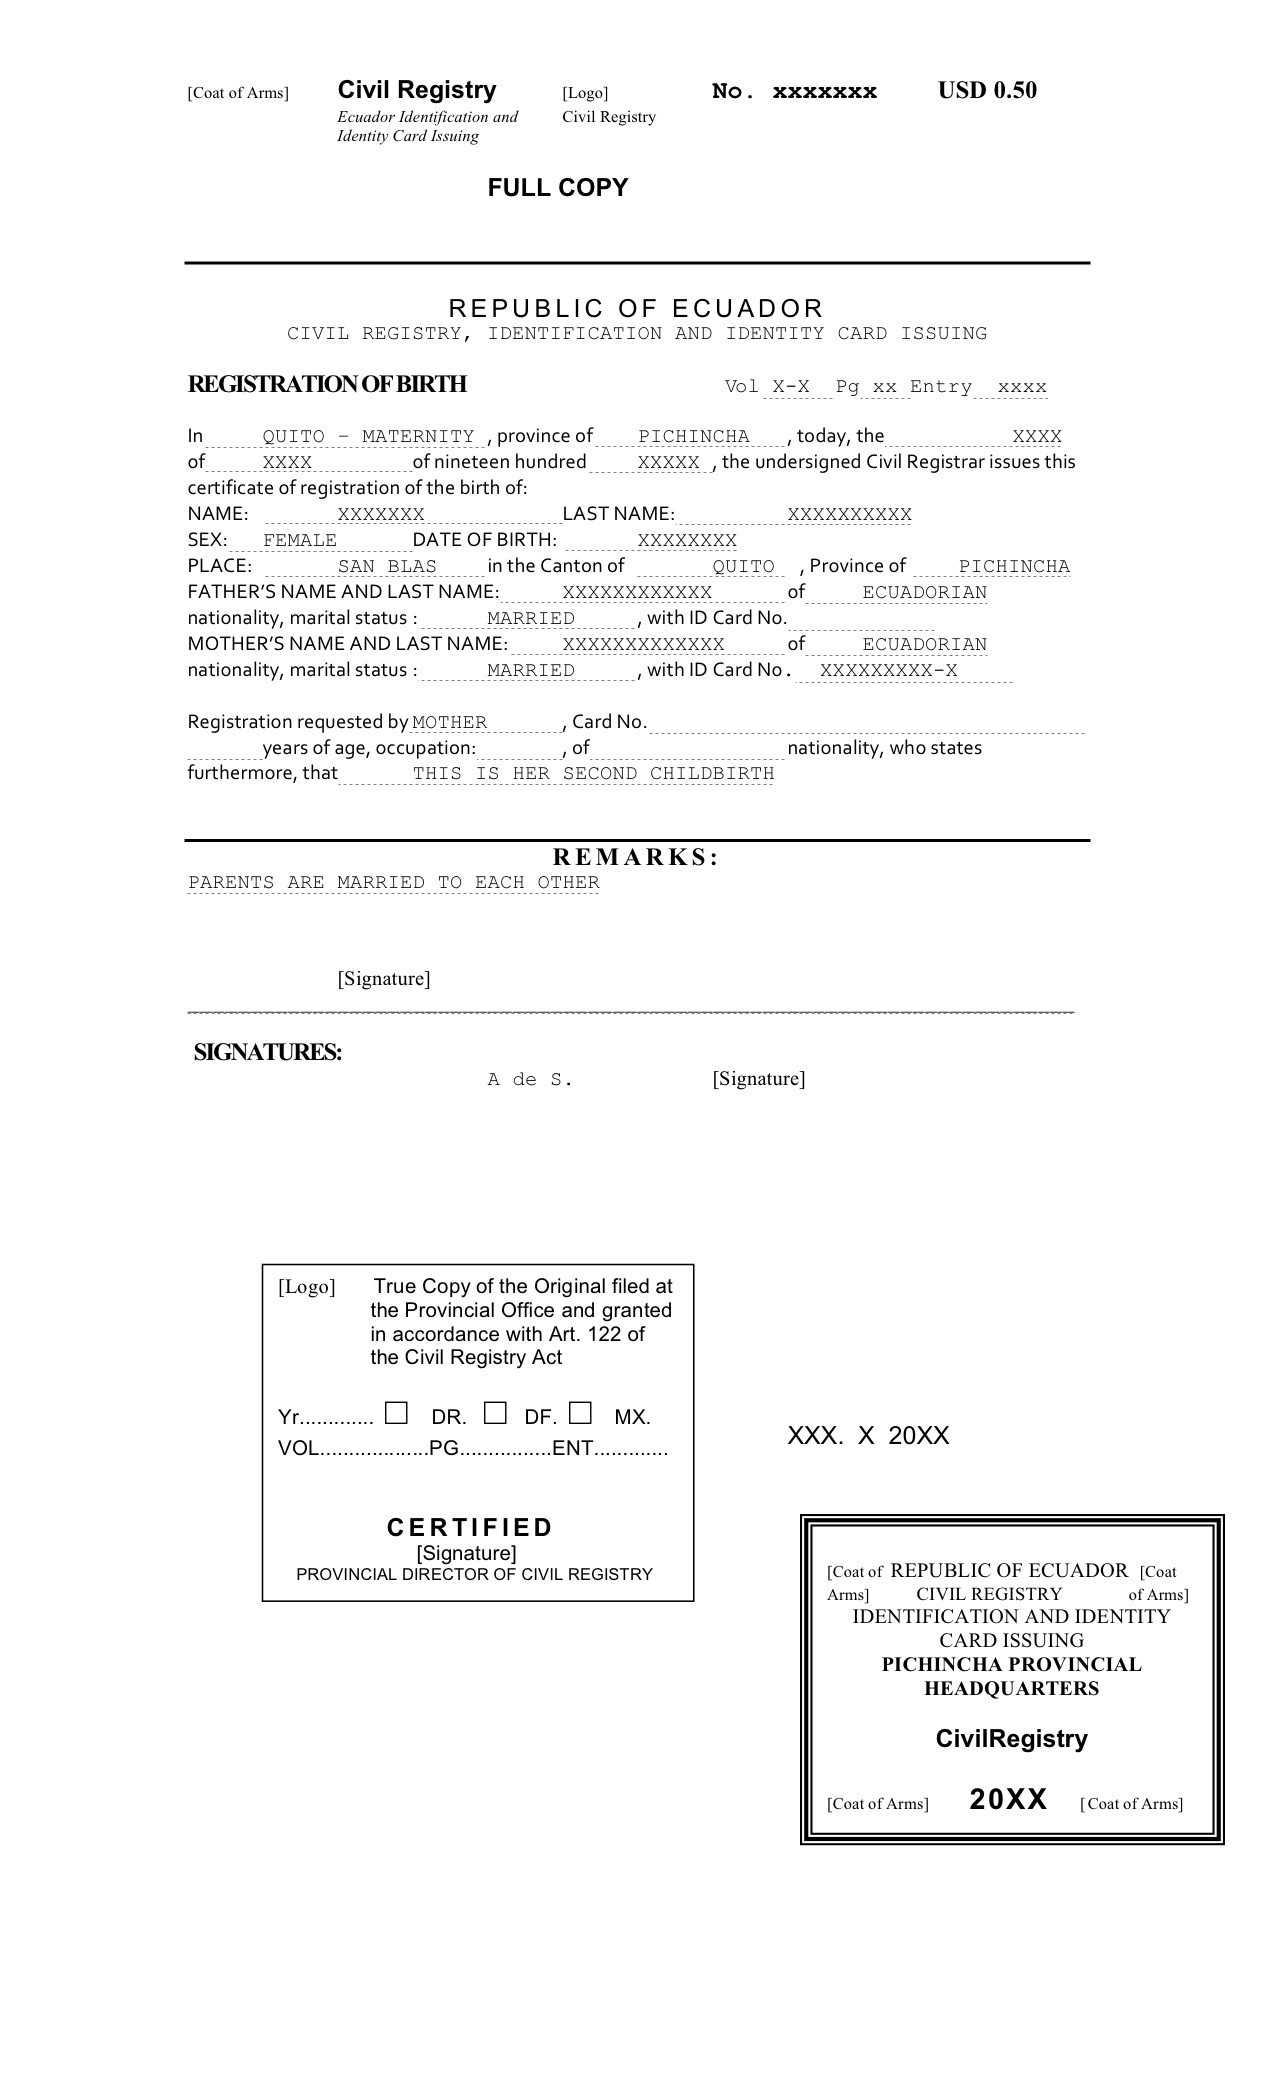 How To Translate A Mexican Birth Certificate To English In Mexican Birth Certificate Translation Template